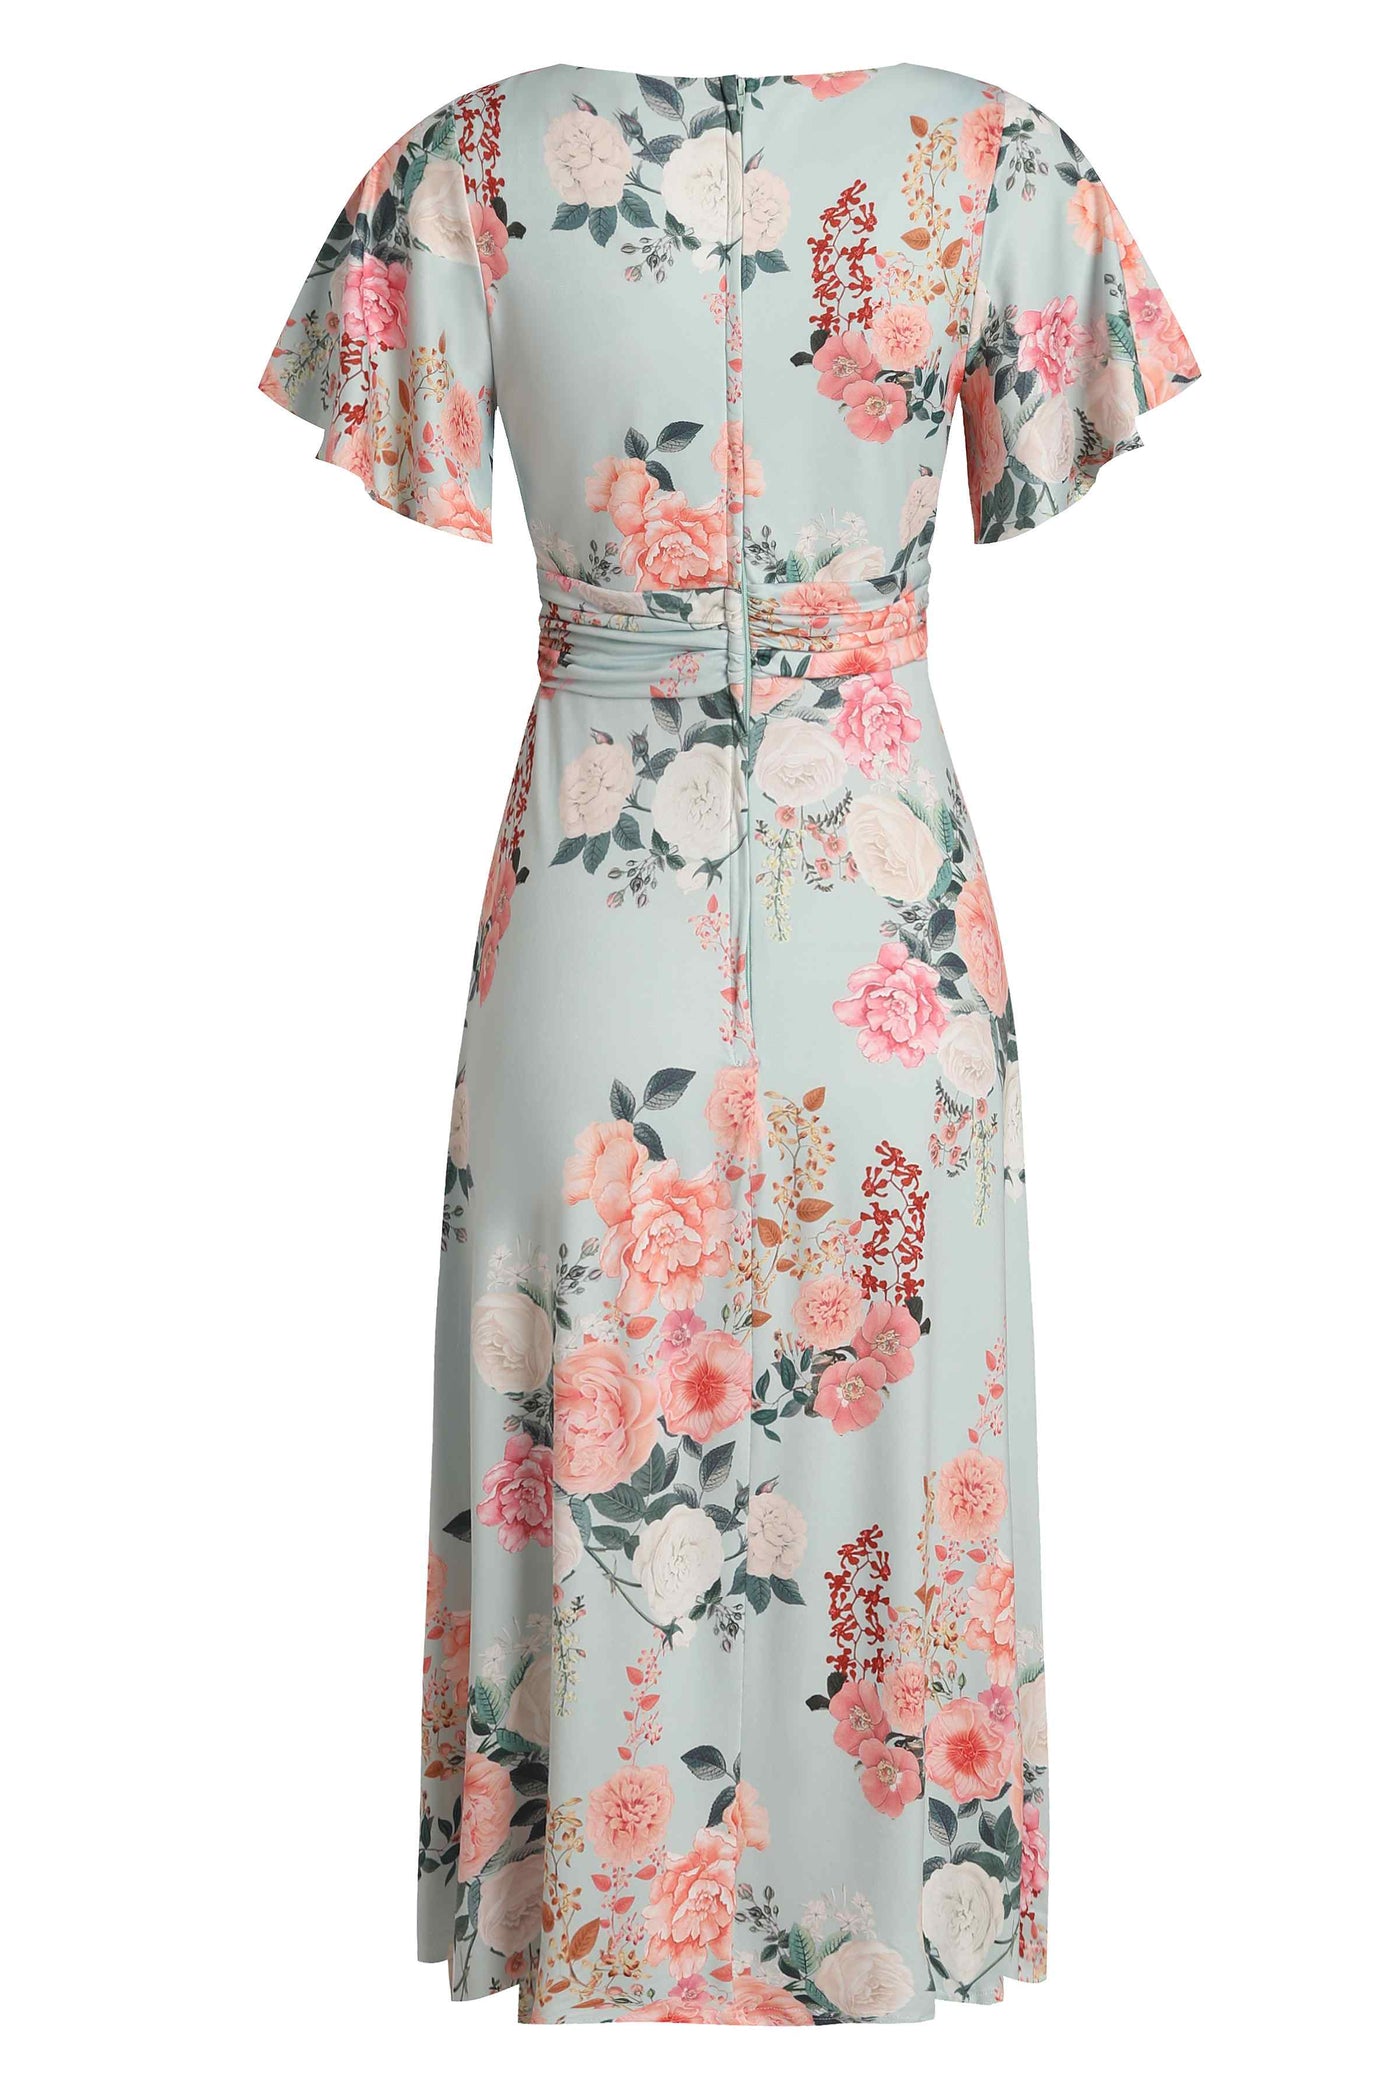 Crossover Bust Mint Green Floral Dress